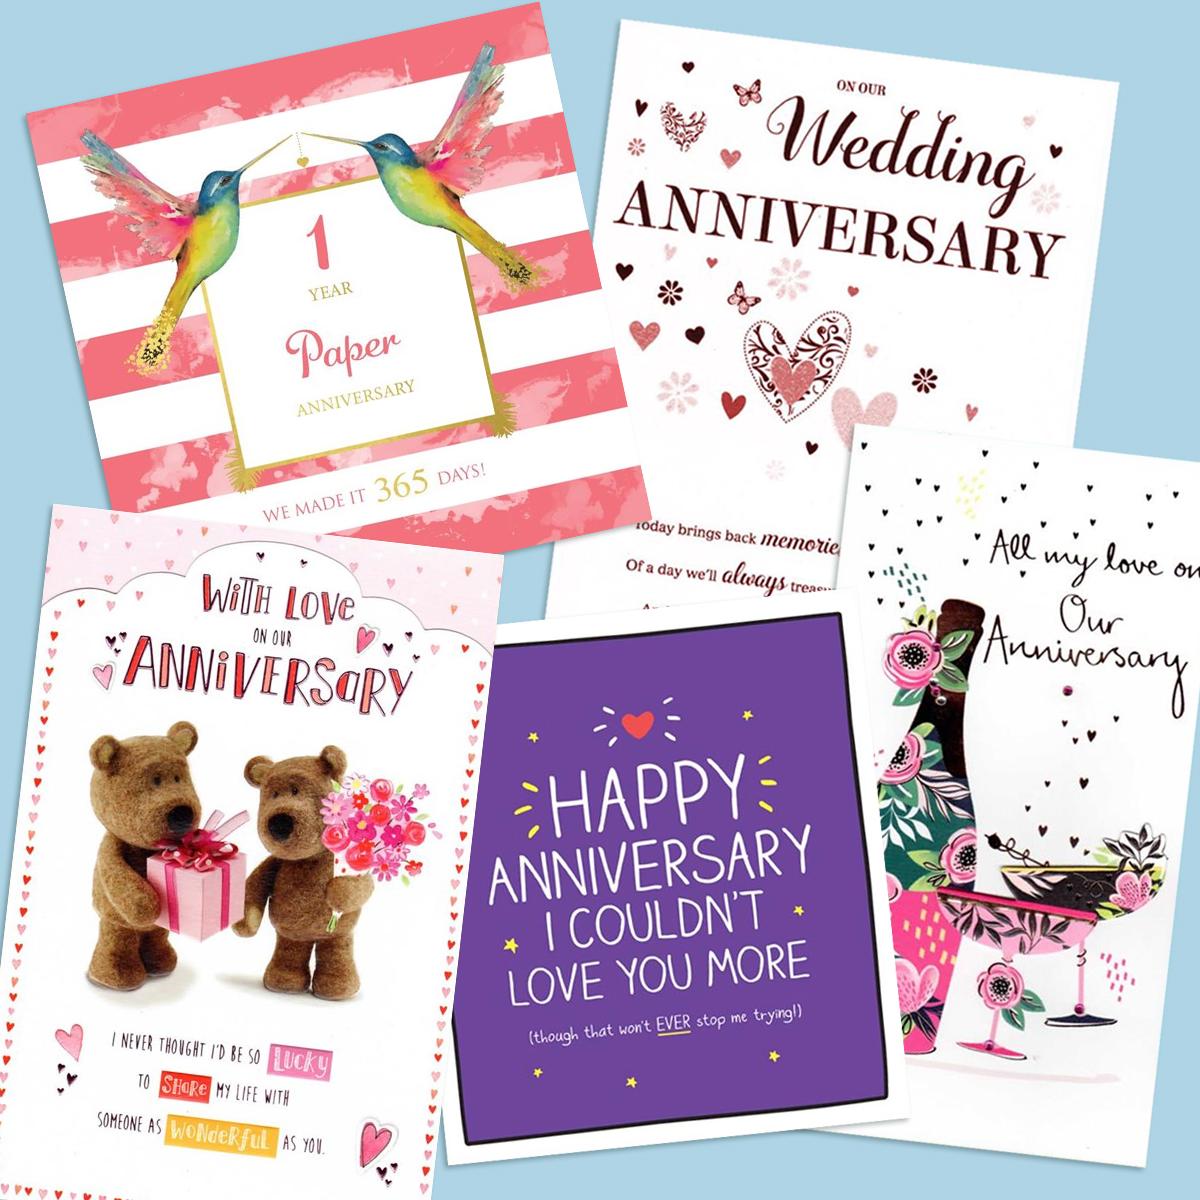 A Selection Of Cards To Show The Depth Of Range In The Our Anniversary Section